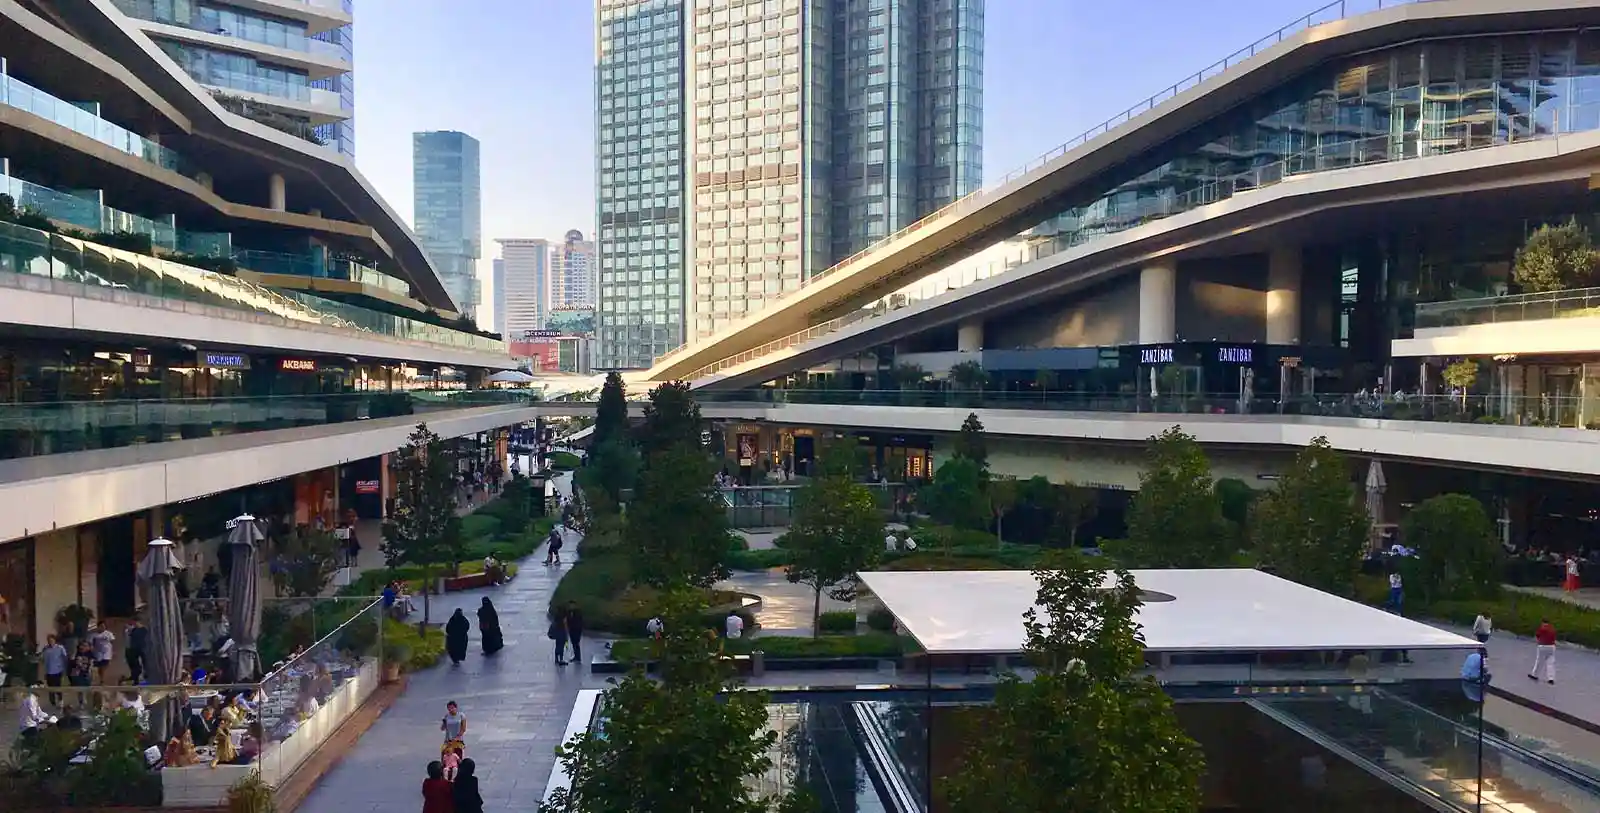 Zorlu Center is a beautiful shopping center in Istanbul